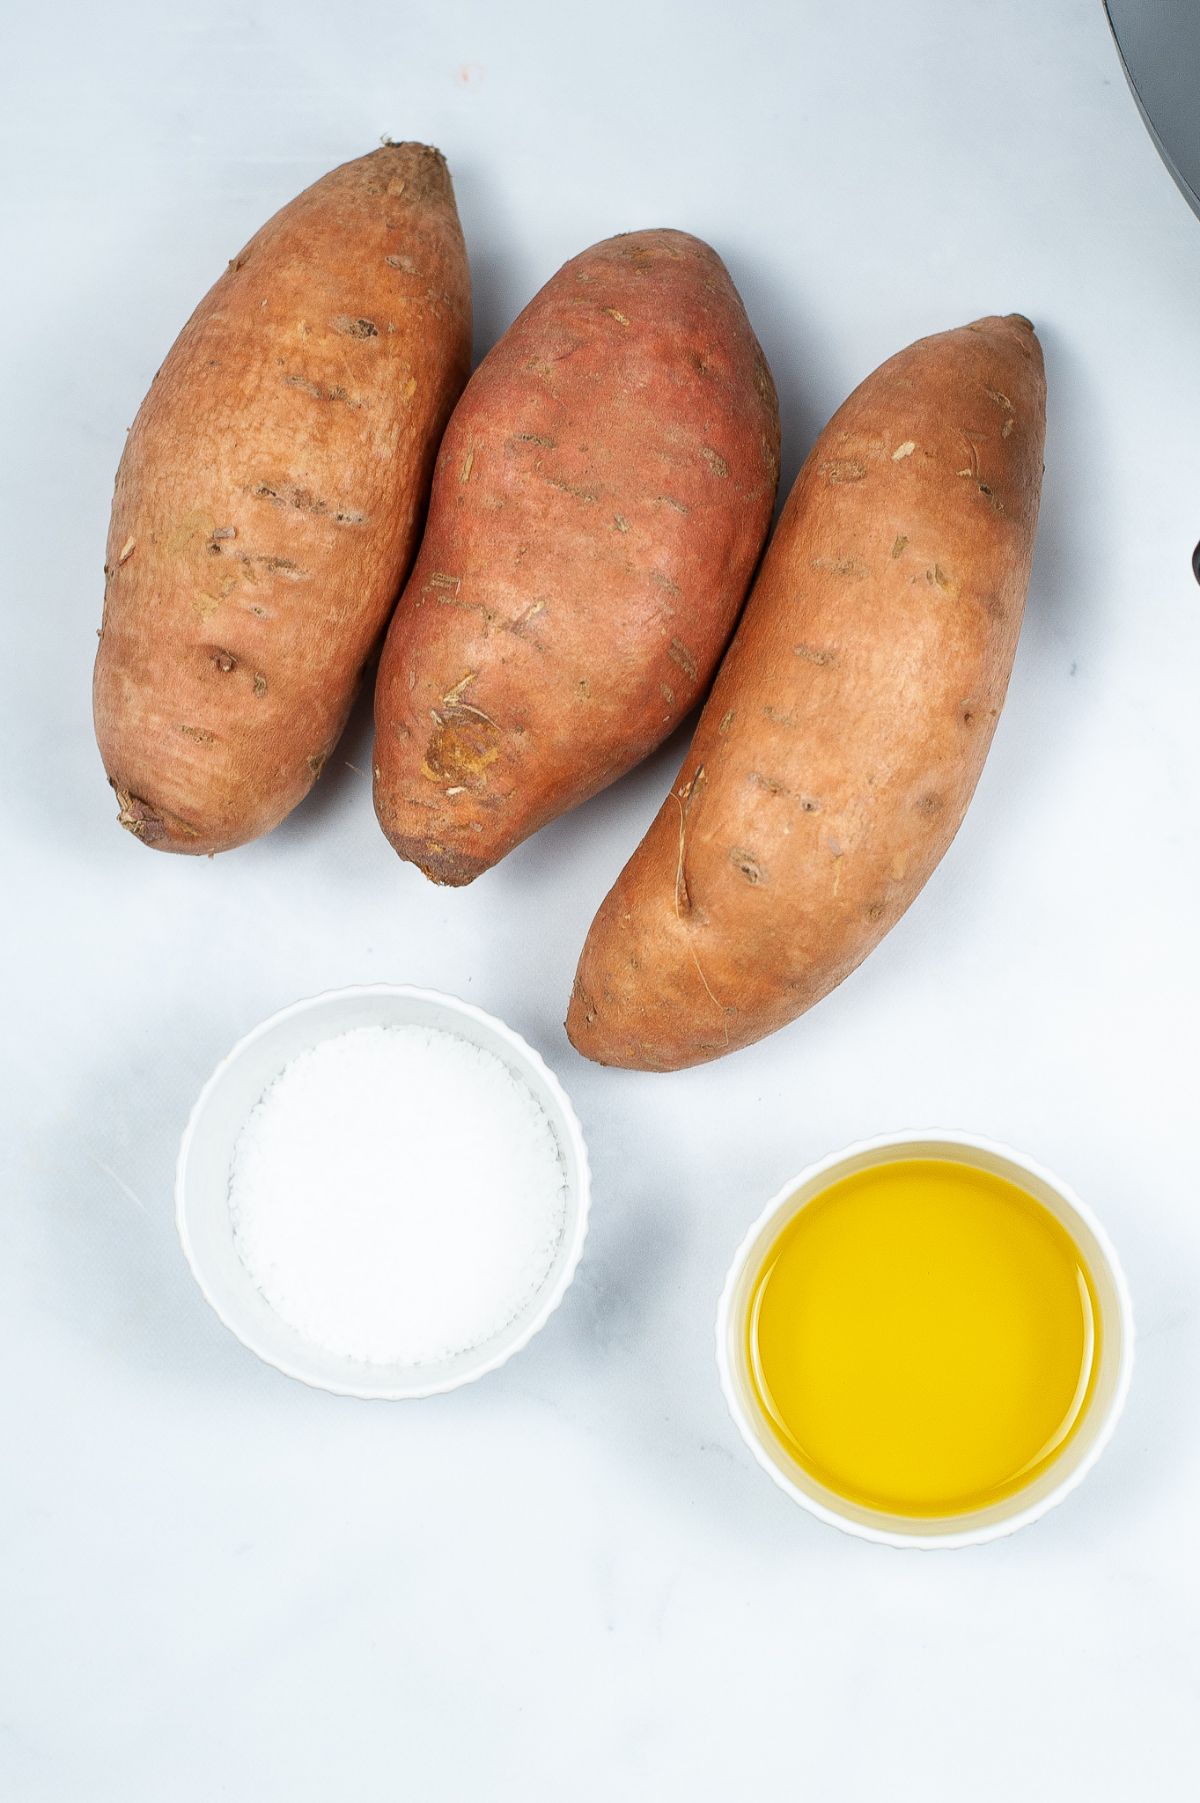 Ingredients used to make an Air Fryer Potato Fries such as sweet potatoes, course salt, and olive oil.